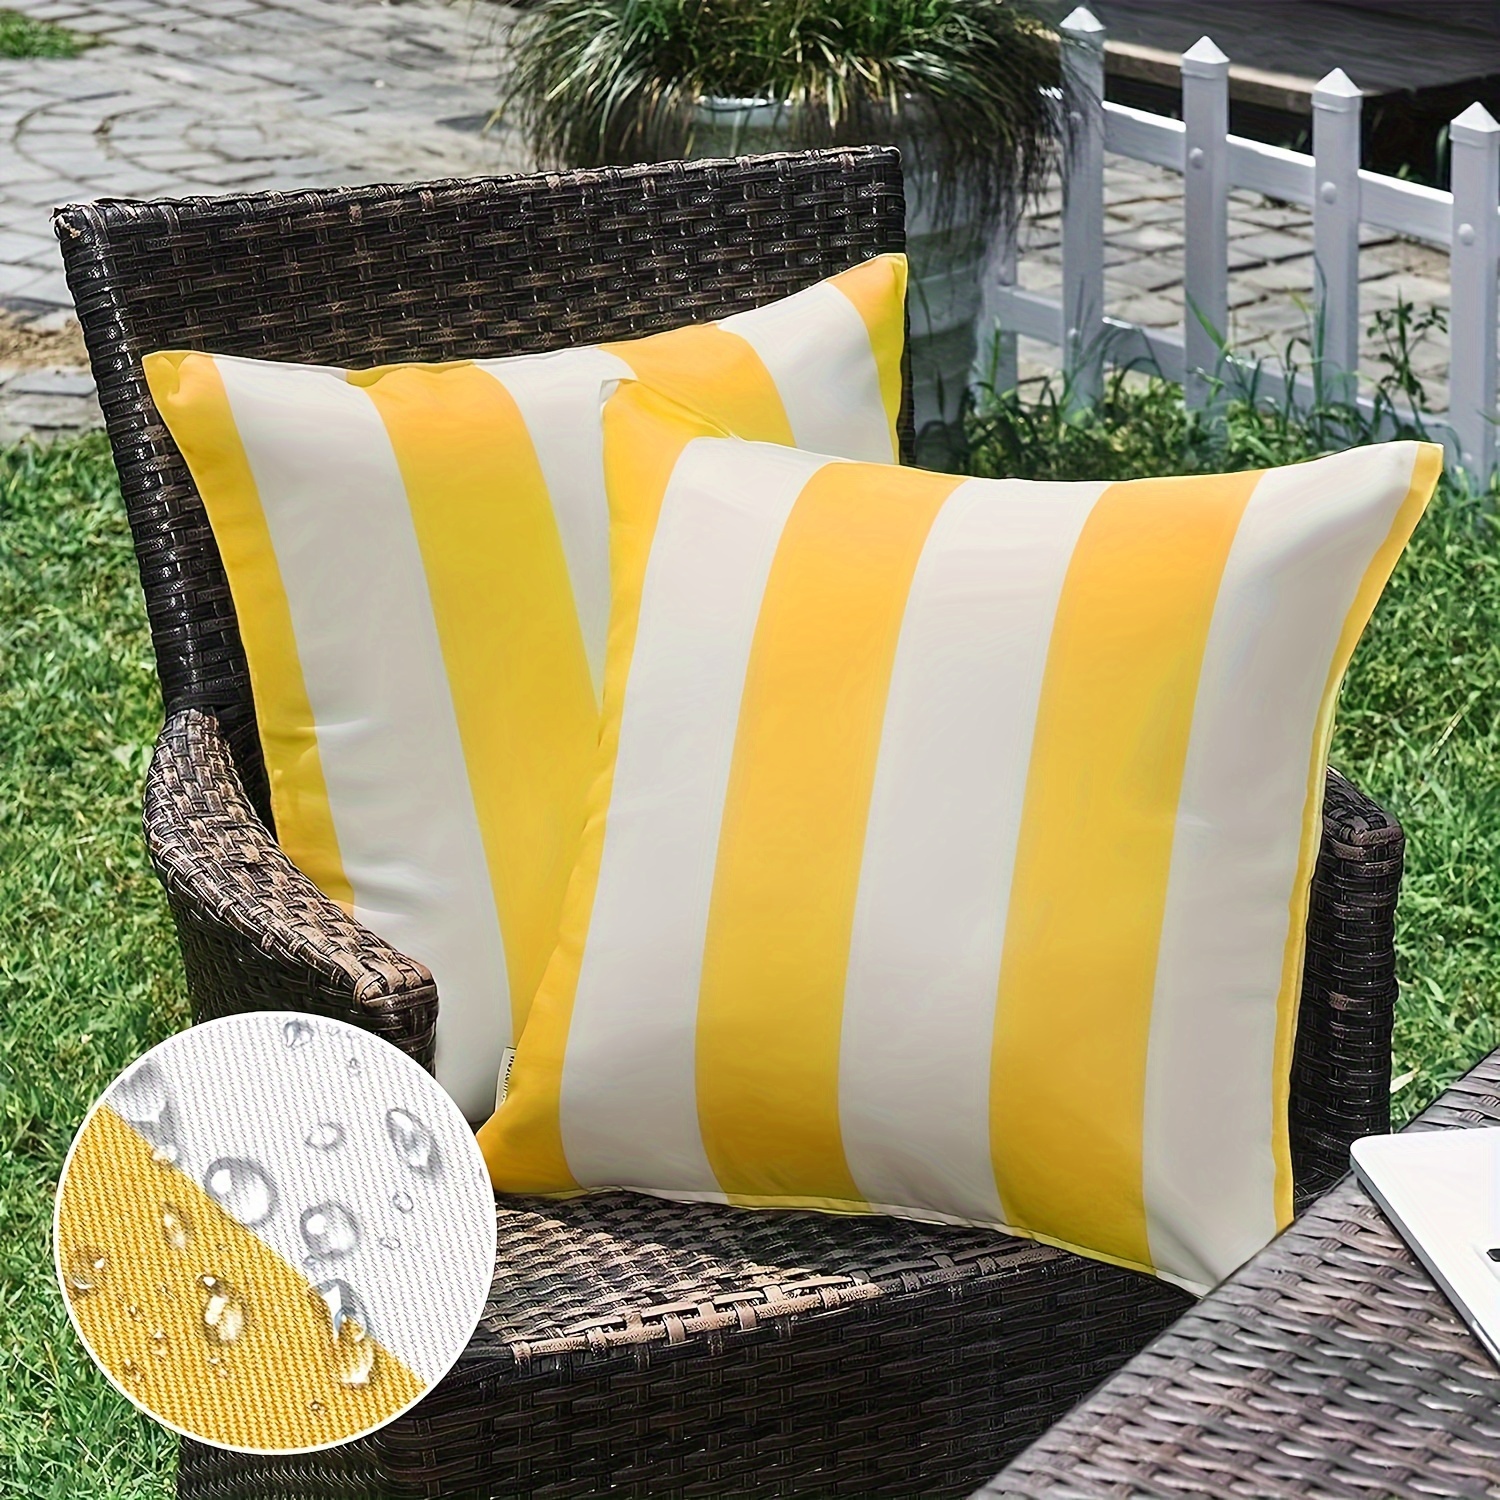 

2-piece Modern Striped Waterproof Throw Pillow Covers - Durable Polyester, Zip Closure For Outdoor & Indoor Use - Perfect For Patio, Balcony, Couch Decor (pillow Inserts Not Included)